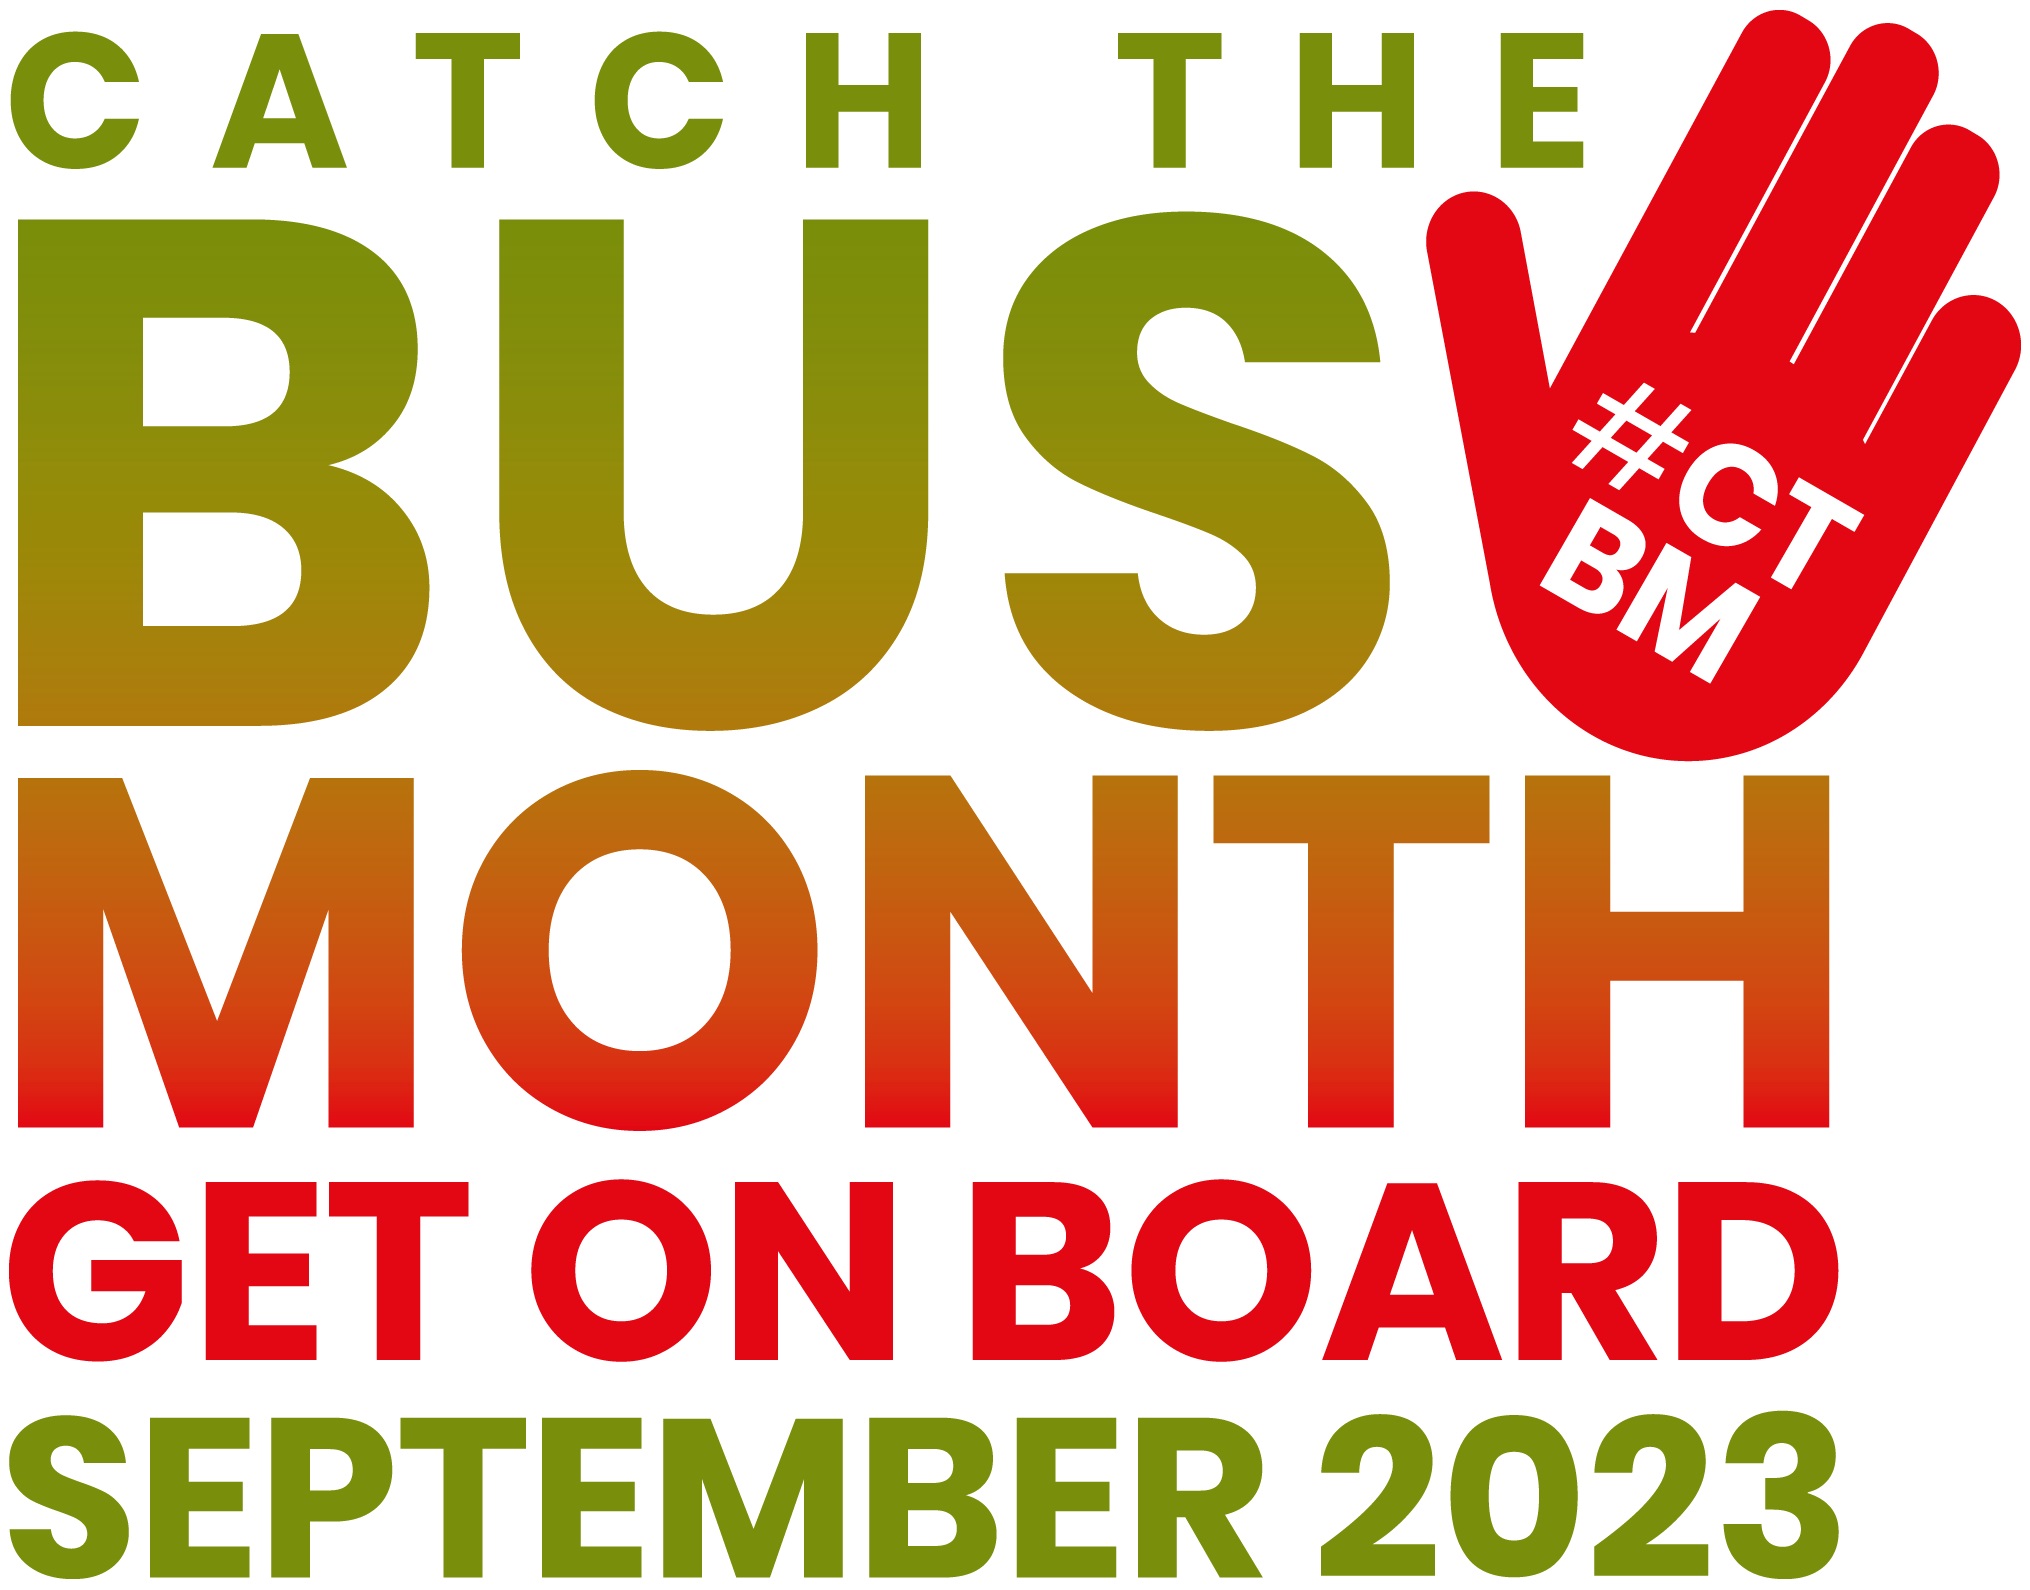 Catch the Bus Month 2023 partner pack is launched